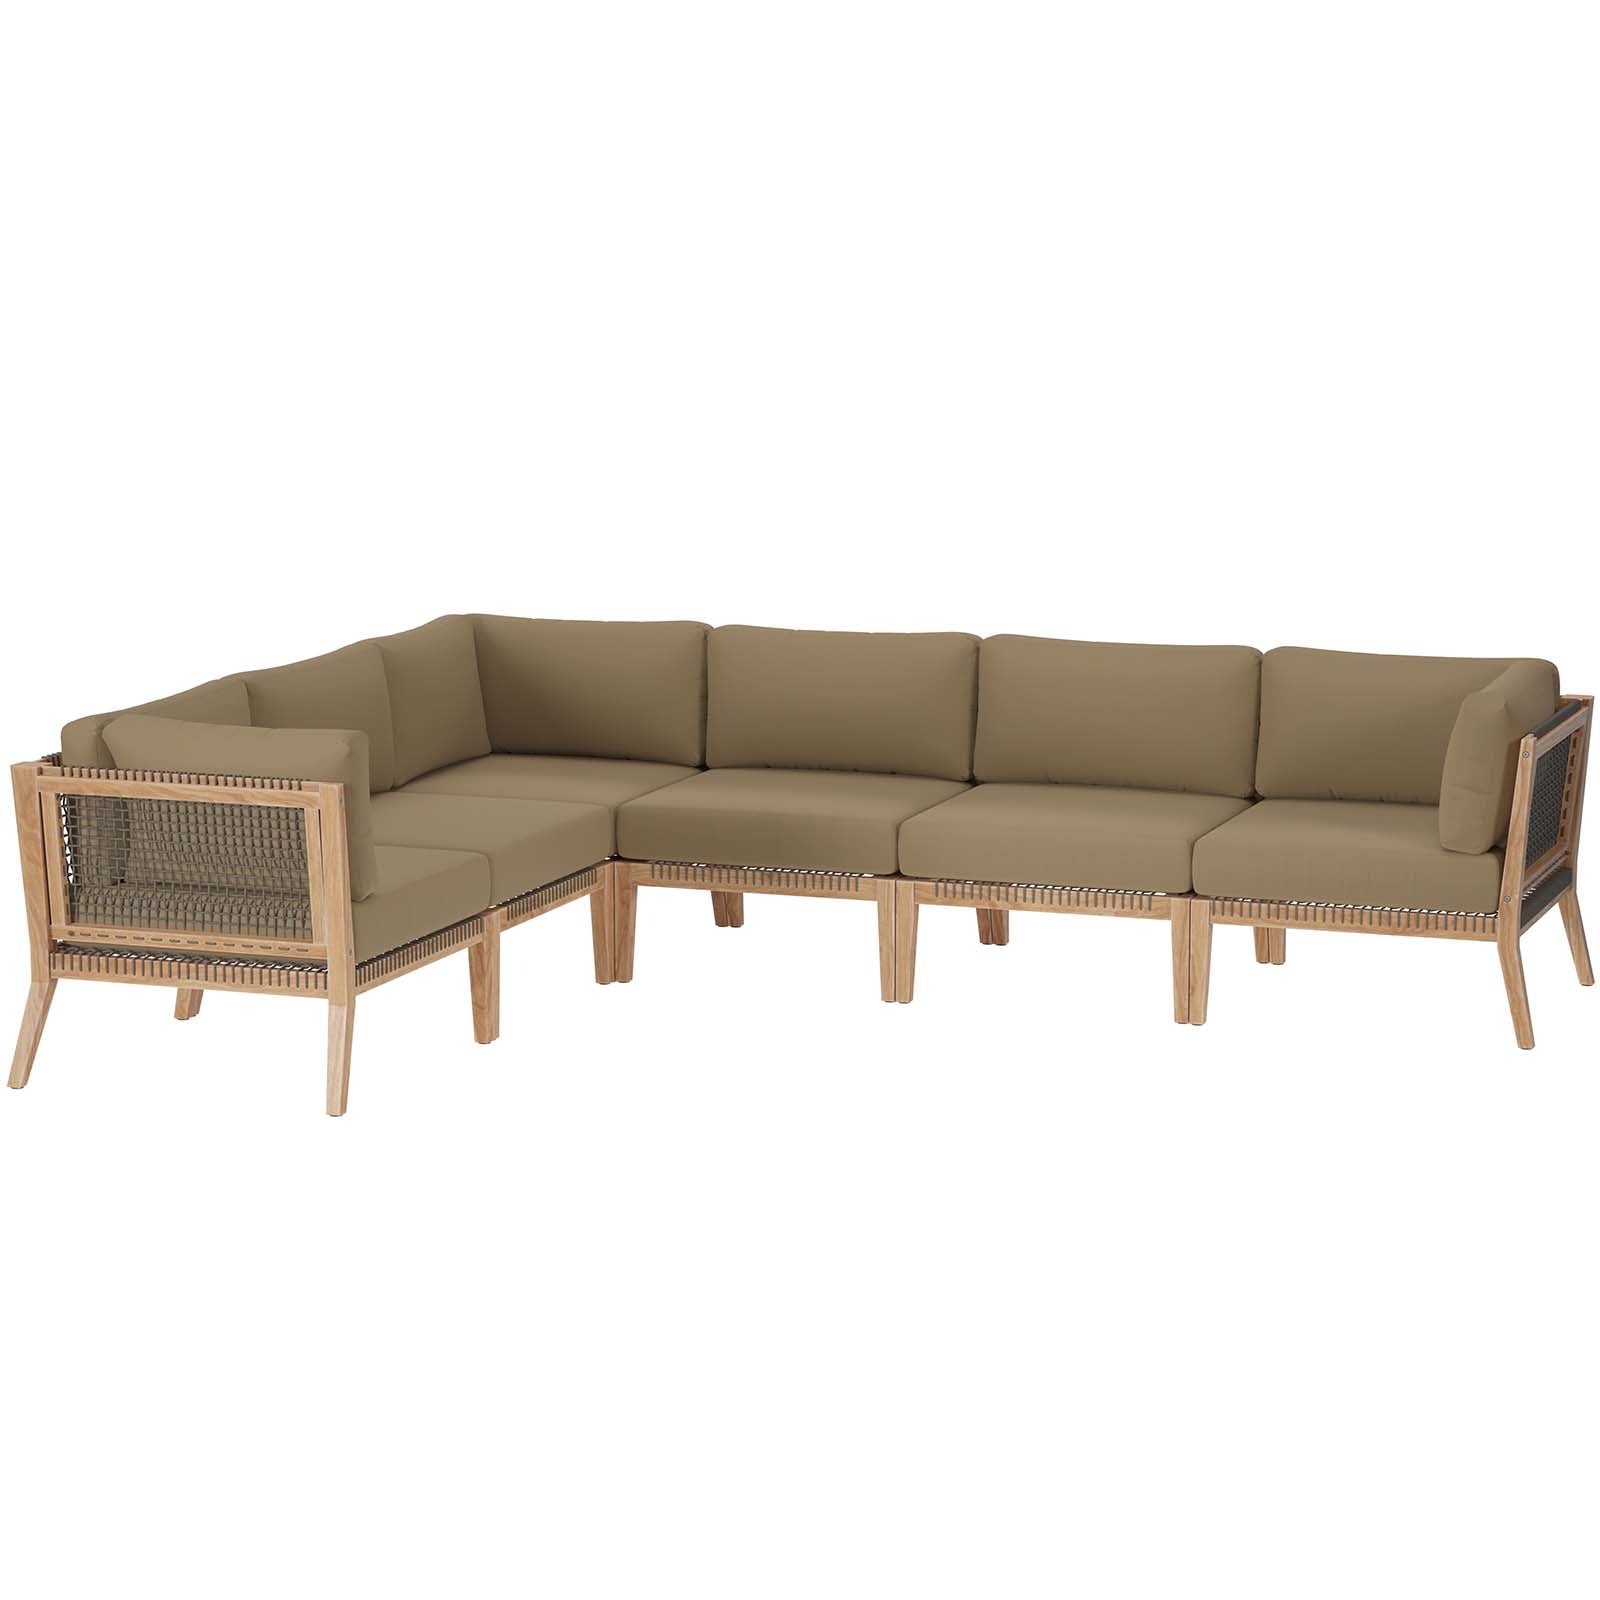 Modway Outdoor Sofas - Clearwater-Outdoor-Patio-Teak-Wood-6-Piece-Sectional-Sofa-Gray-Light-Brown